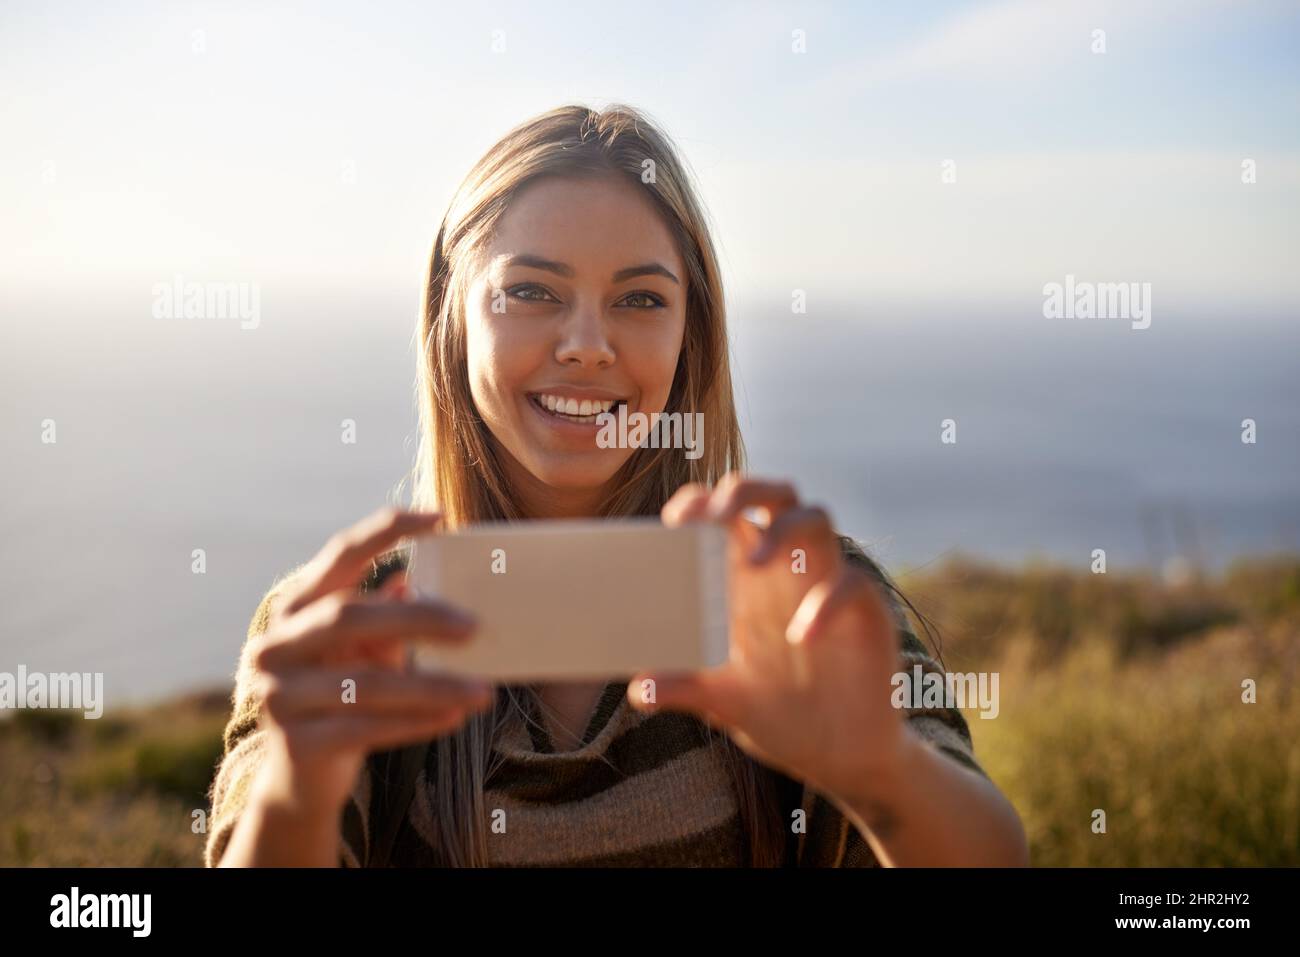 A moment worth remembering. Portrait of an attractive young woman holding up her cellphone to take a photo outdoors. Stock Photo